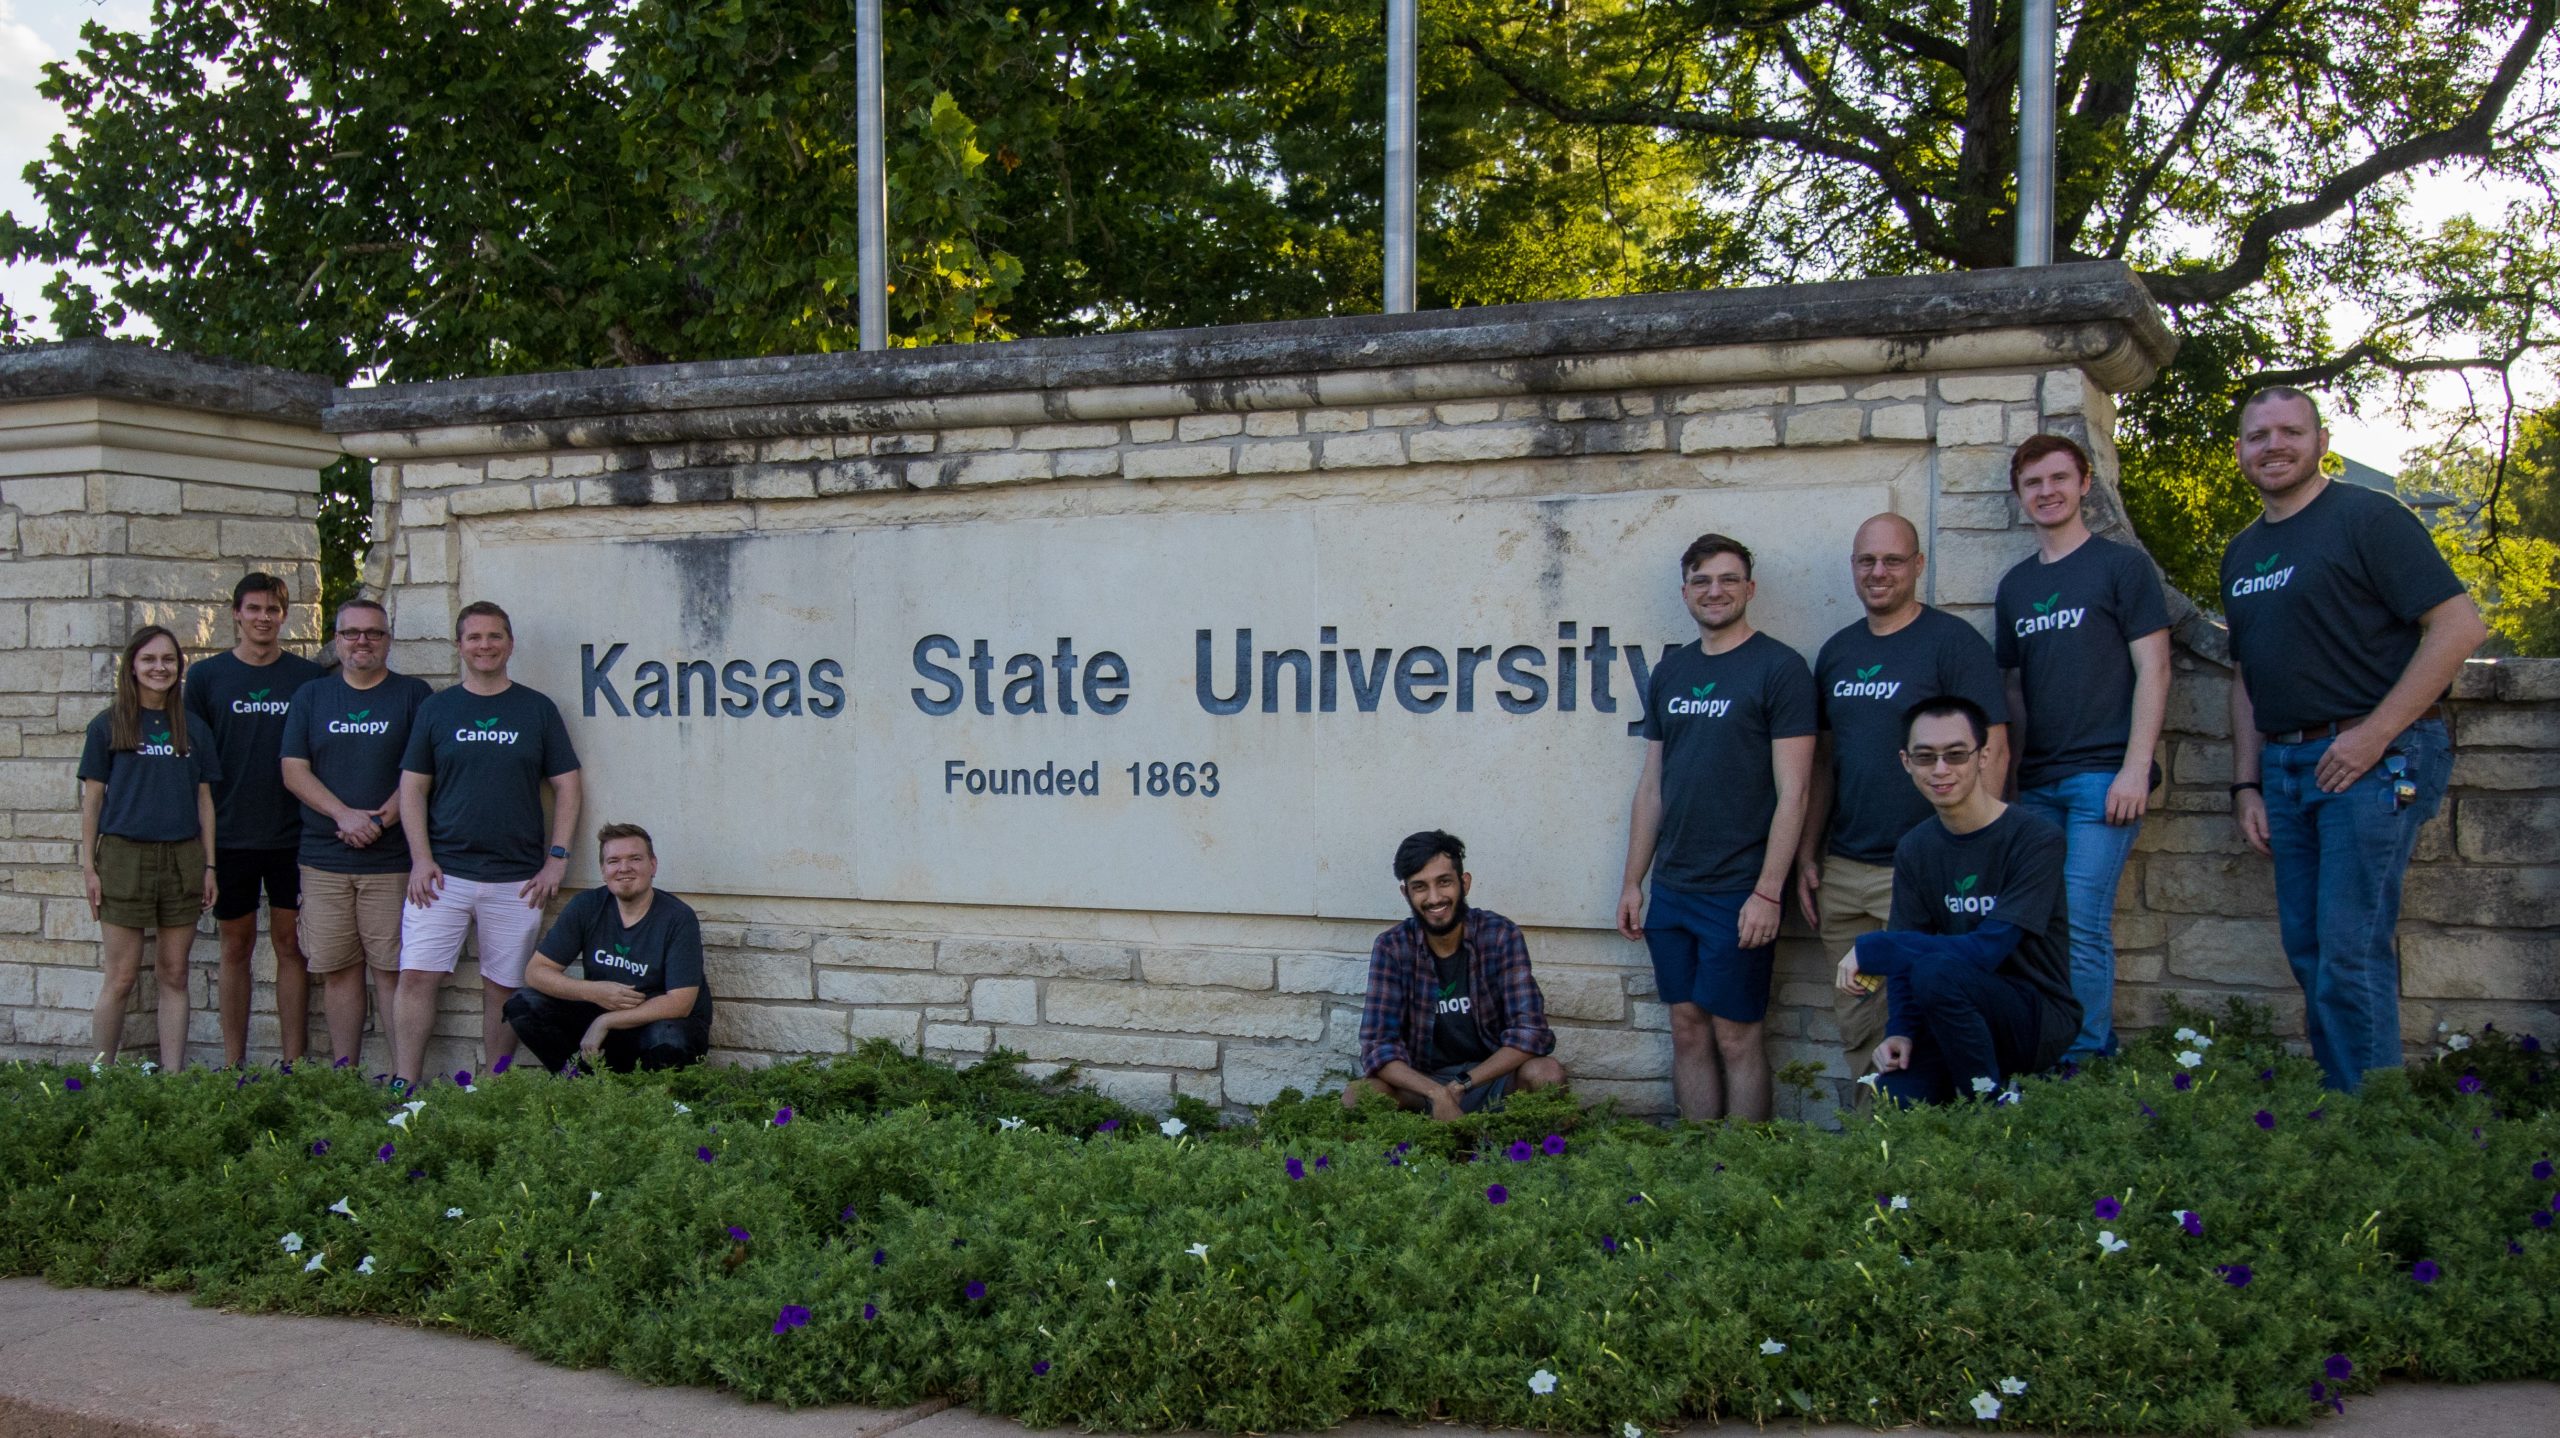 Canopy team in front of Kansas State University sign